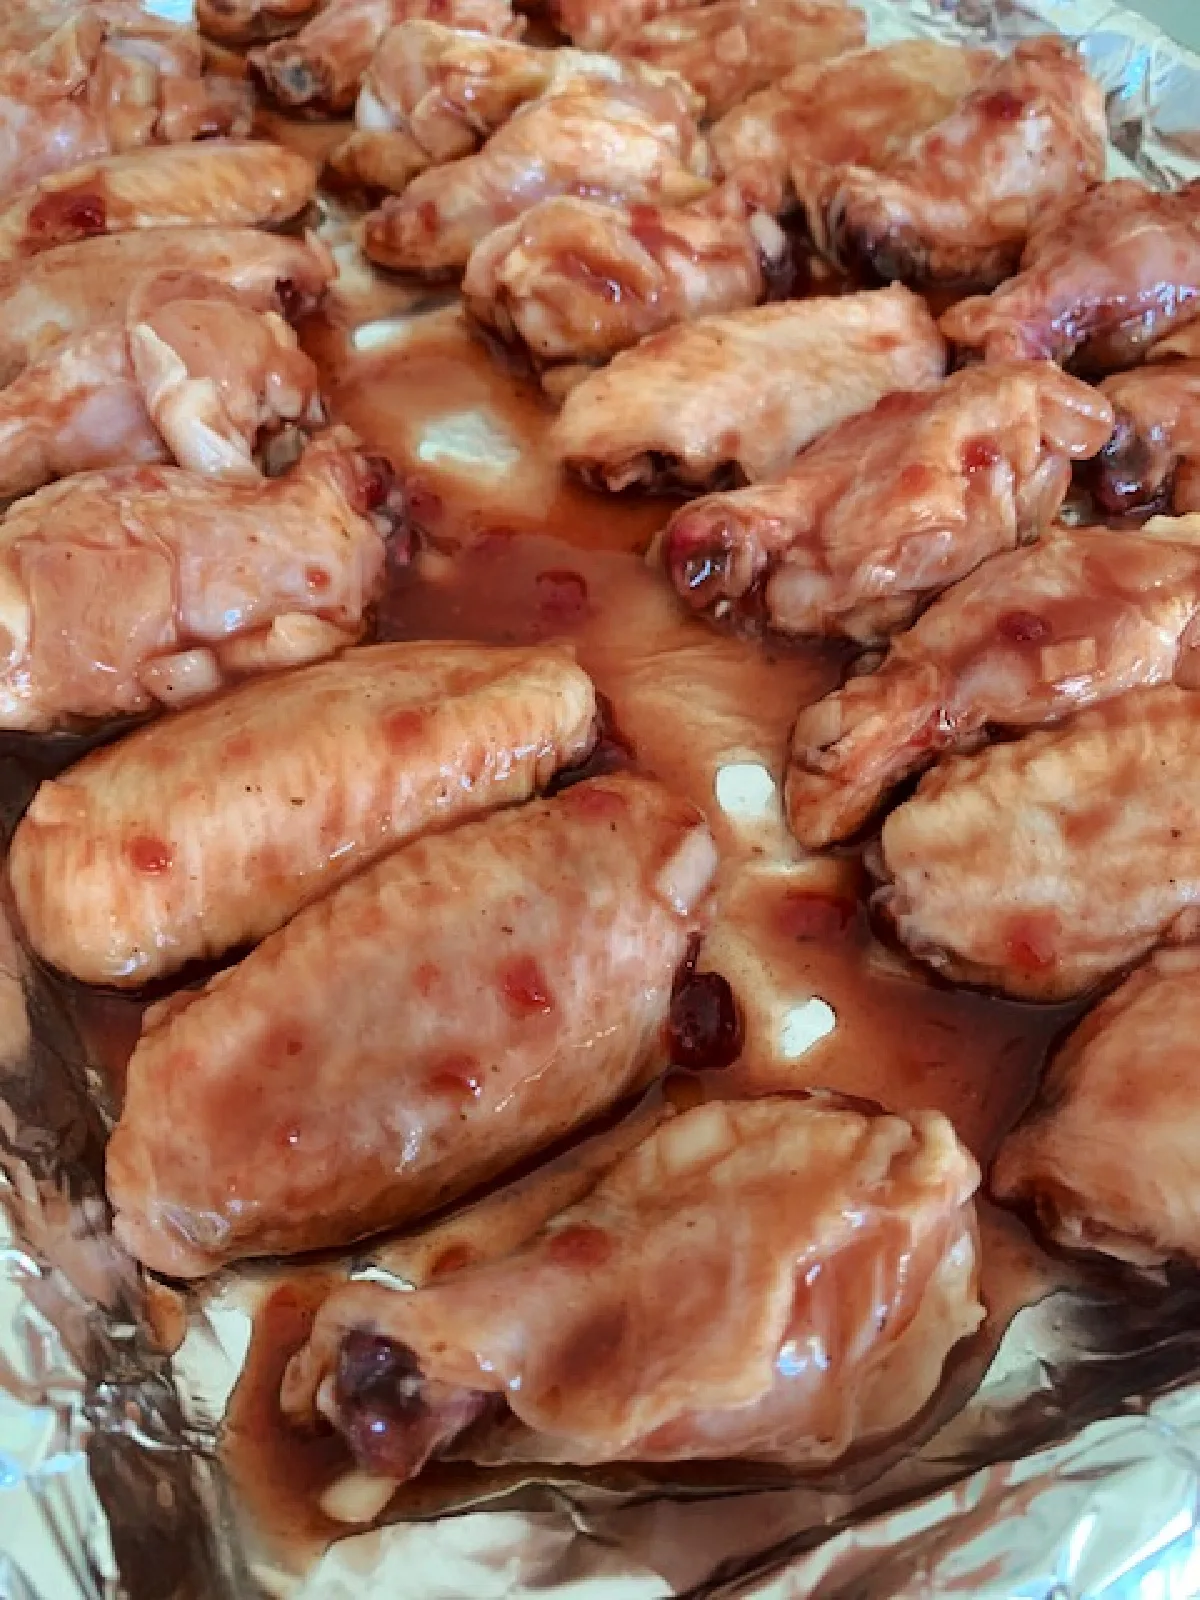 Chicken wings on a baking sheet covered in a sauce ready for the oven.